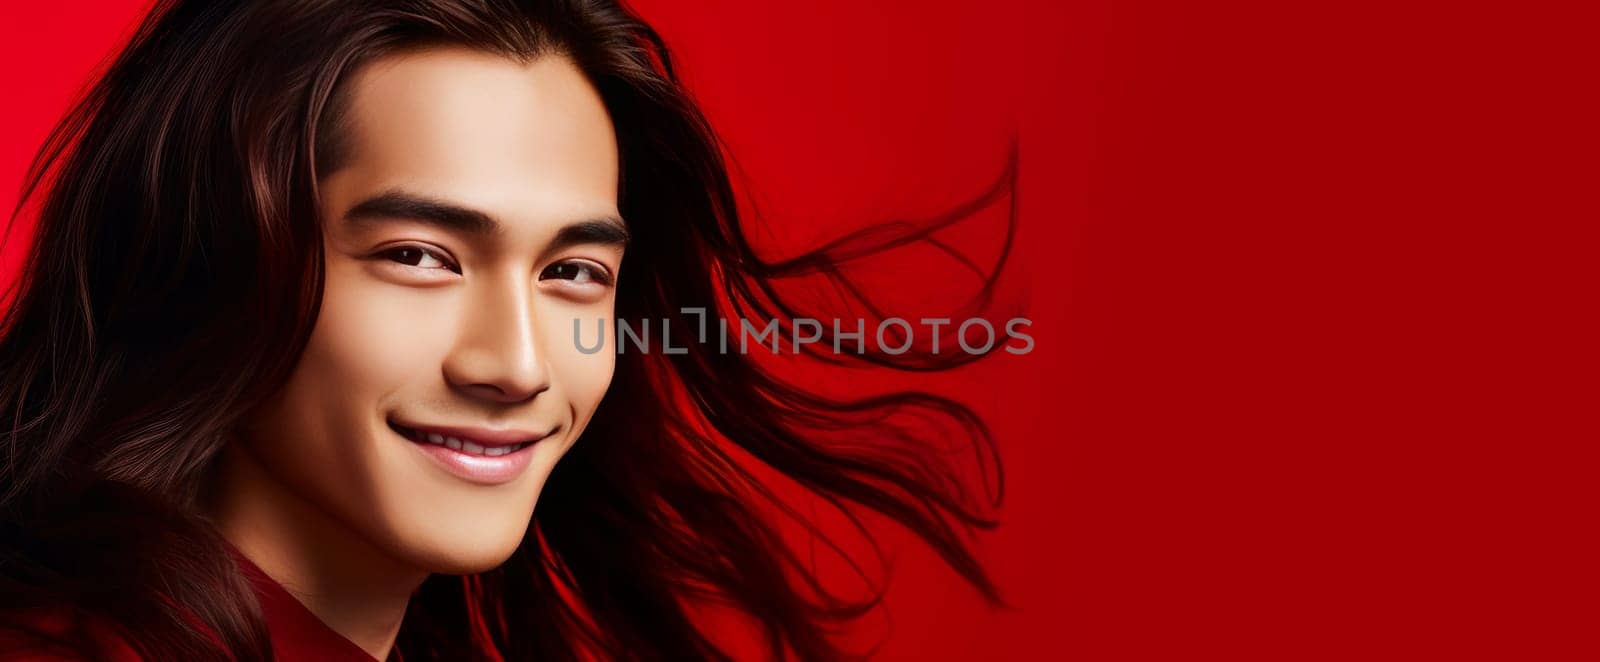 Elegant handsome smiling young Asian man with long hair, on red background, banner, copy space, portrait. Advertising of cosmetic products, spa treatments, shampoos and hair care products, dentistry and medicine, perfumes and cosmetology for men